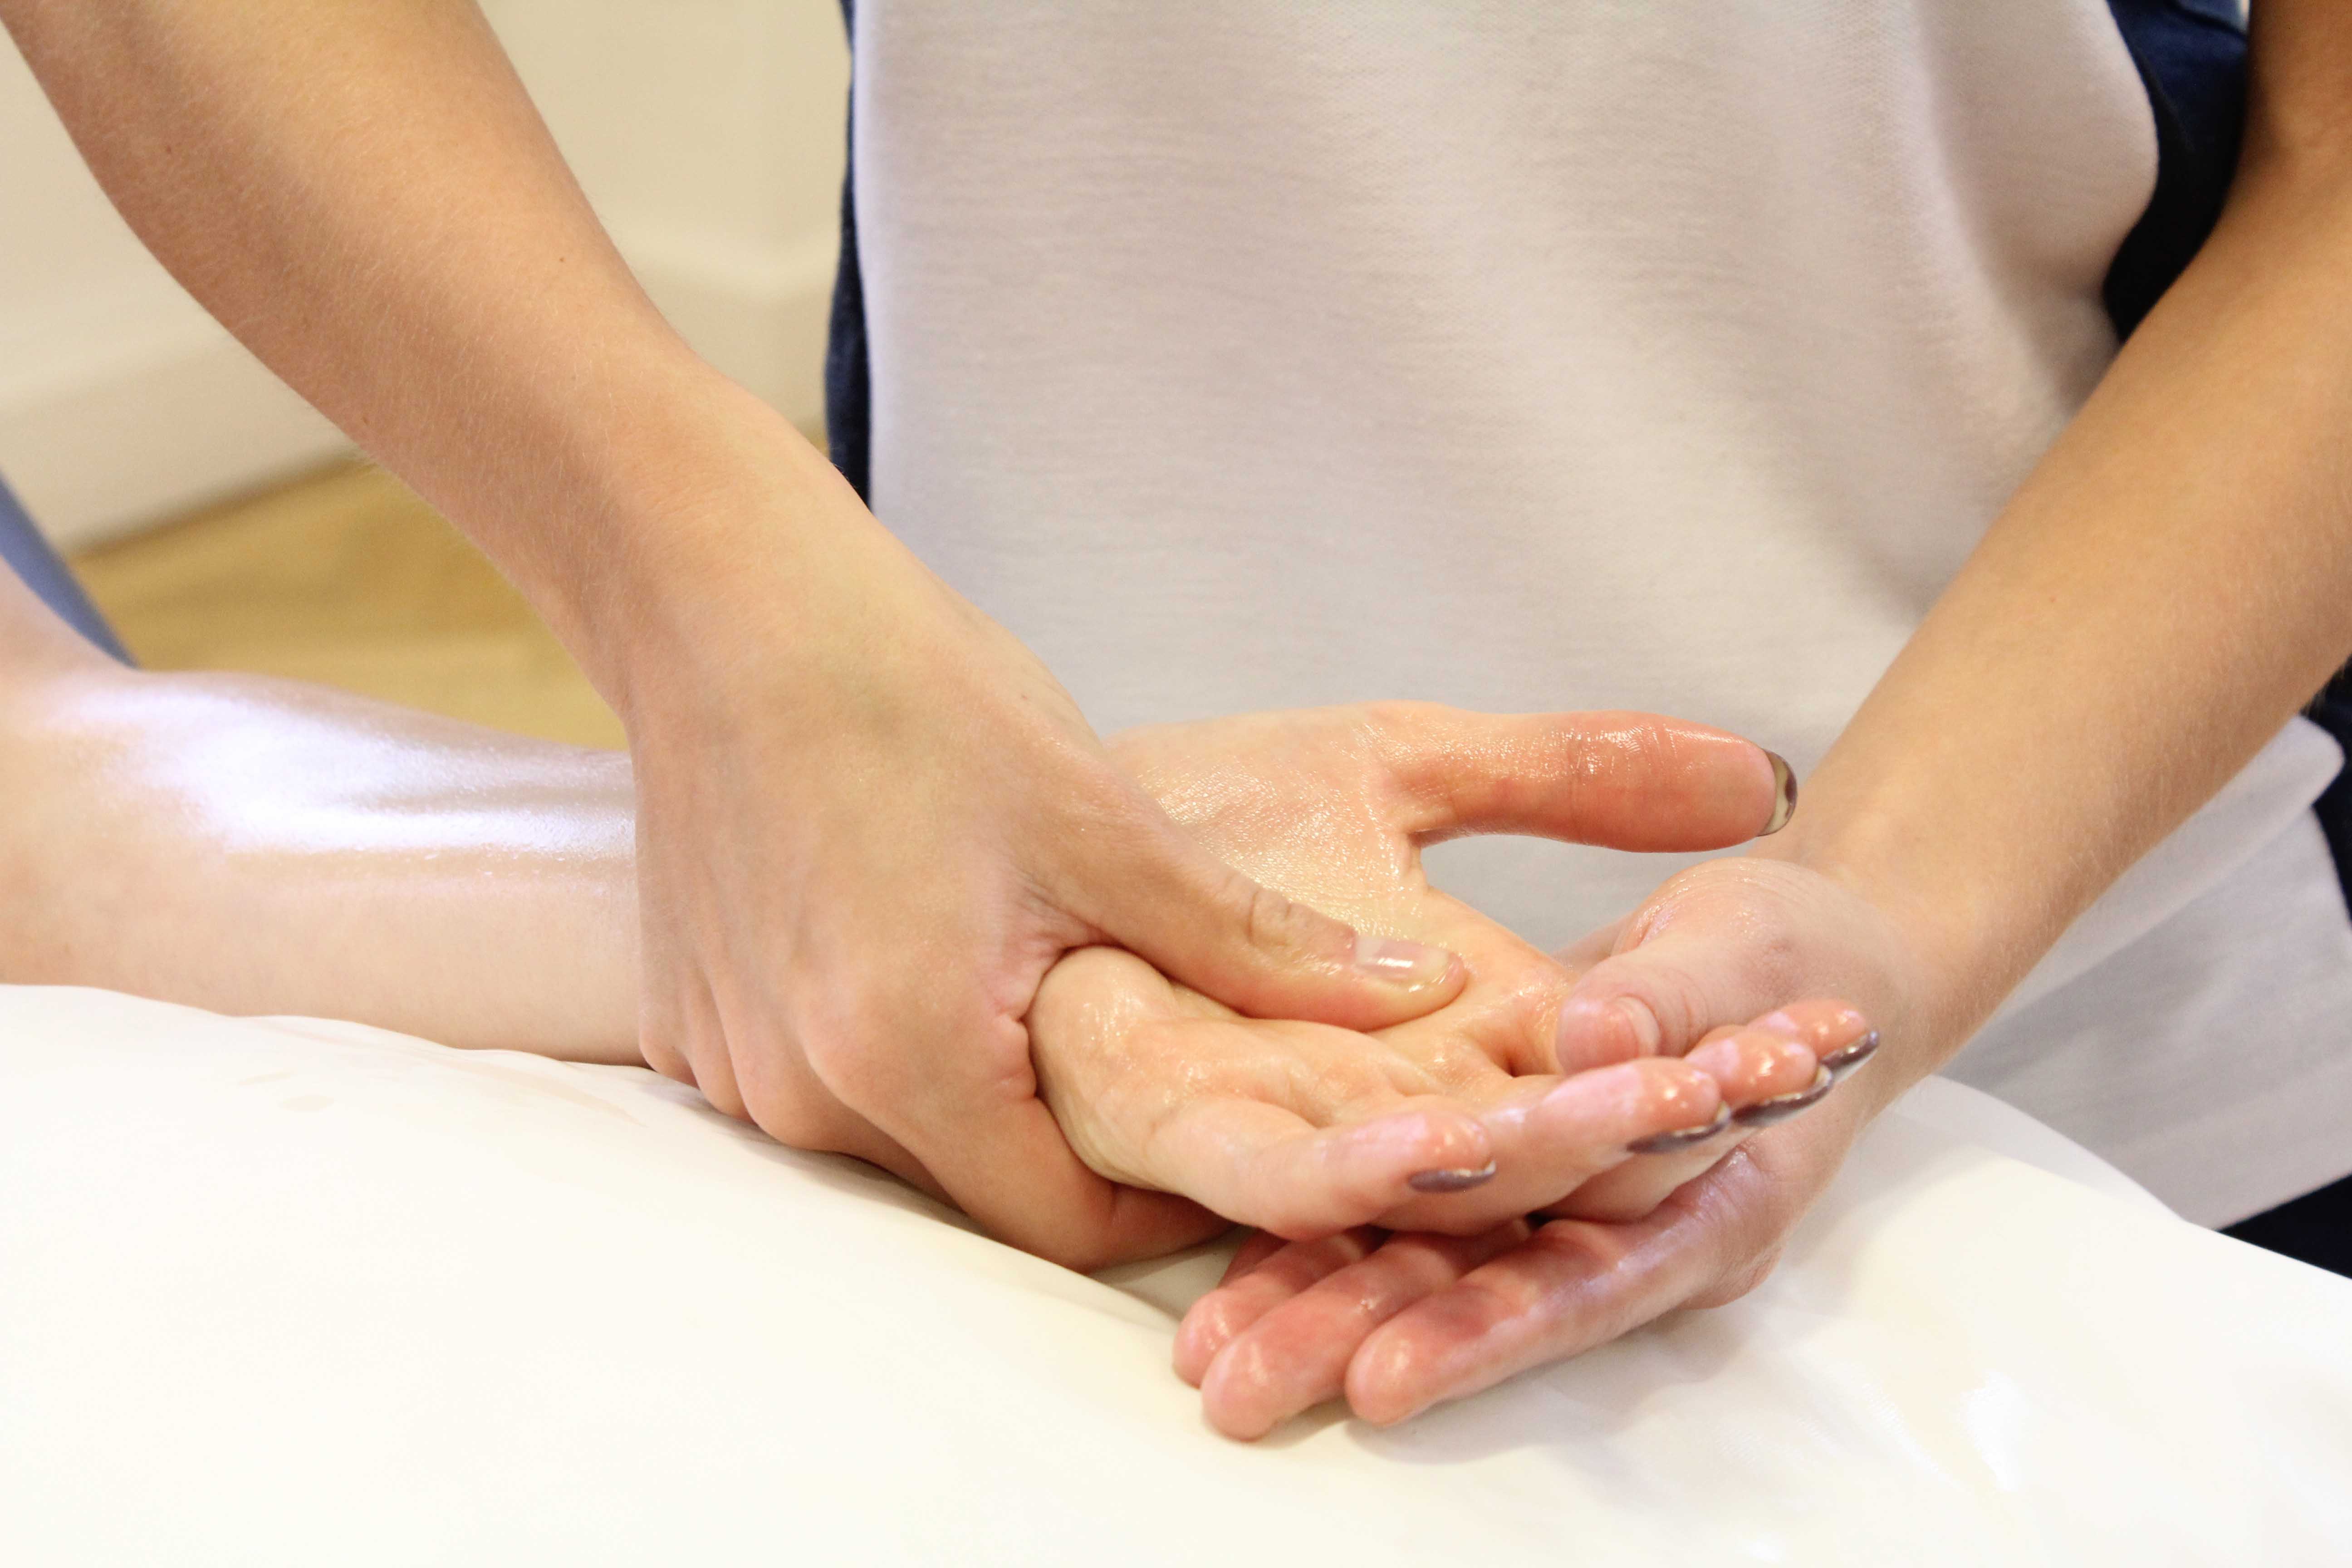 Therapist soft tissue massage of the metacarpals and connective tissues in the hand